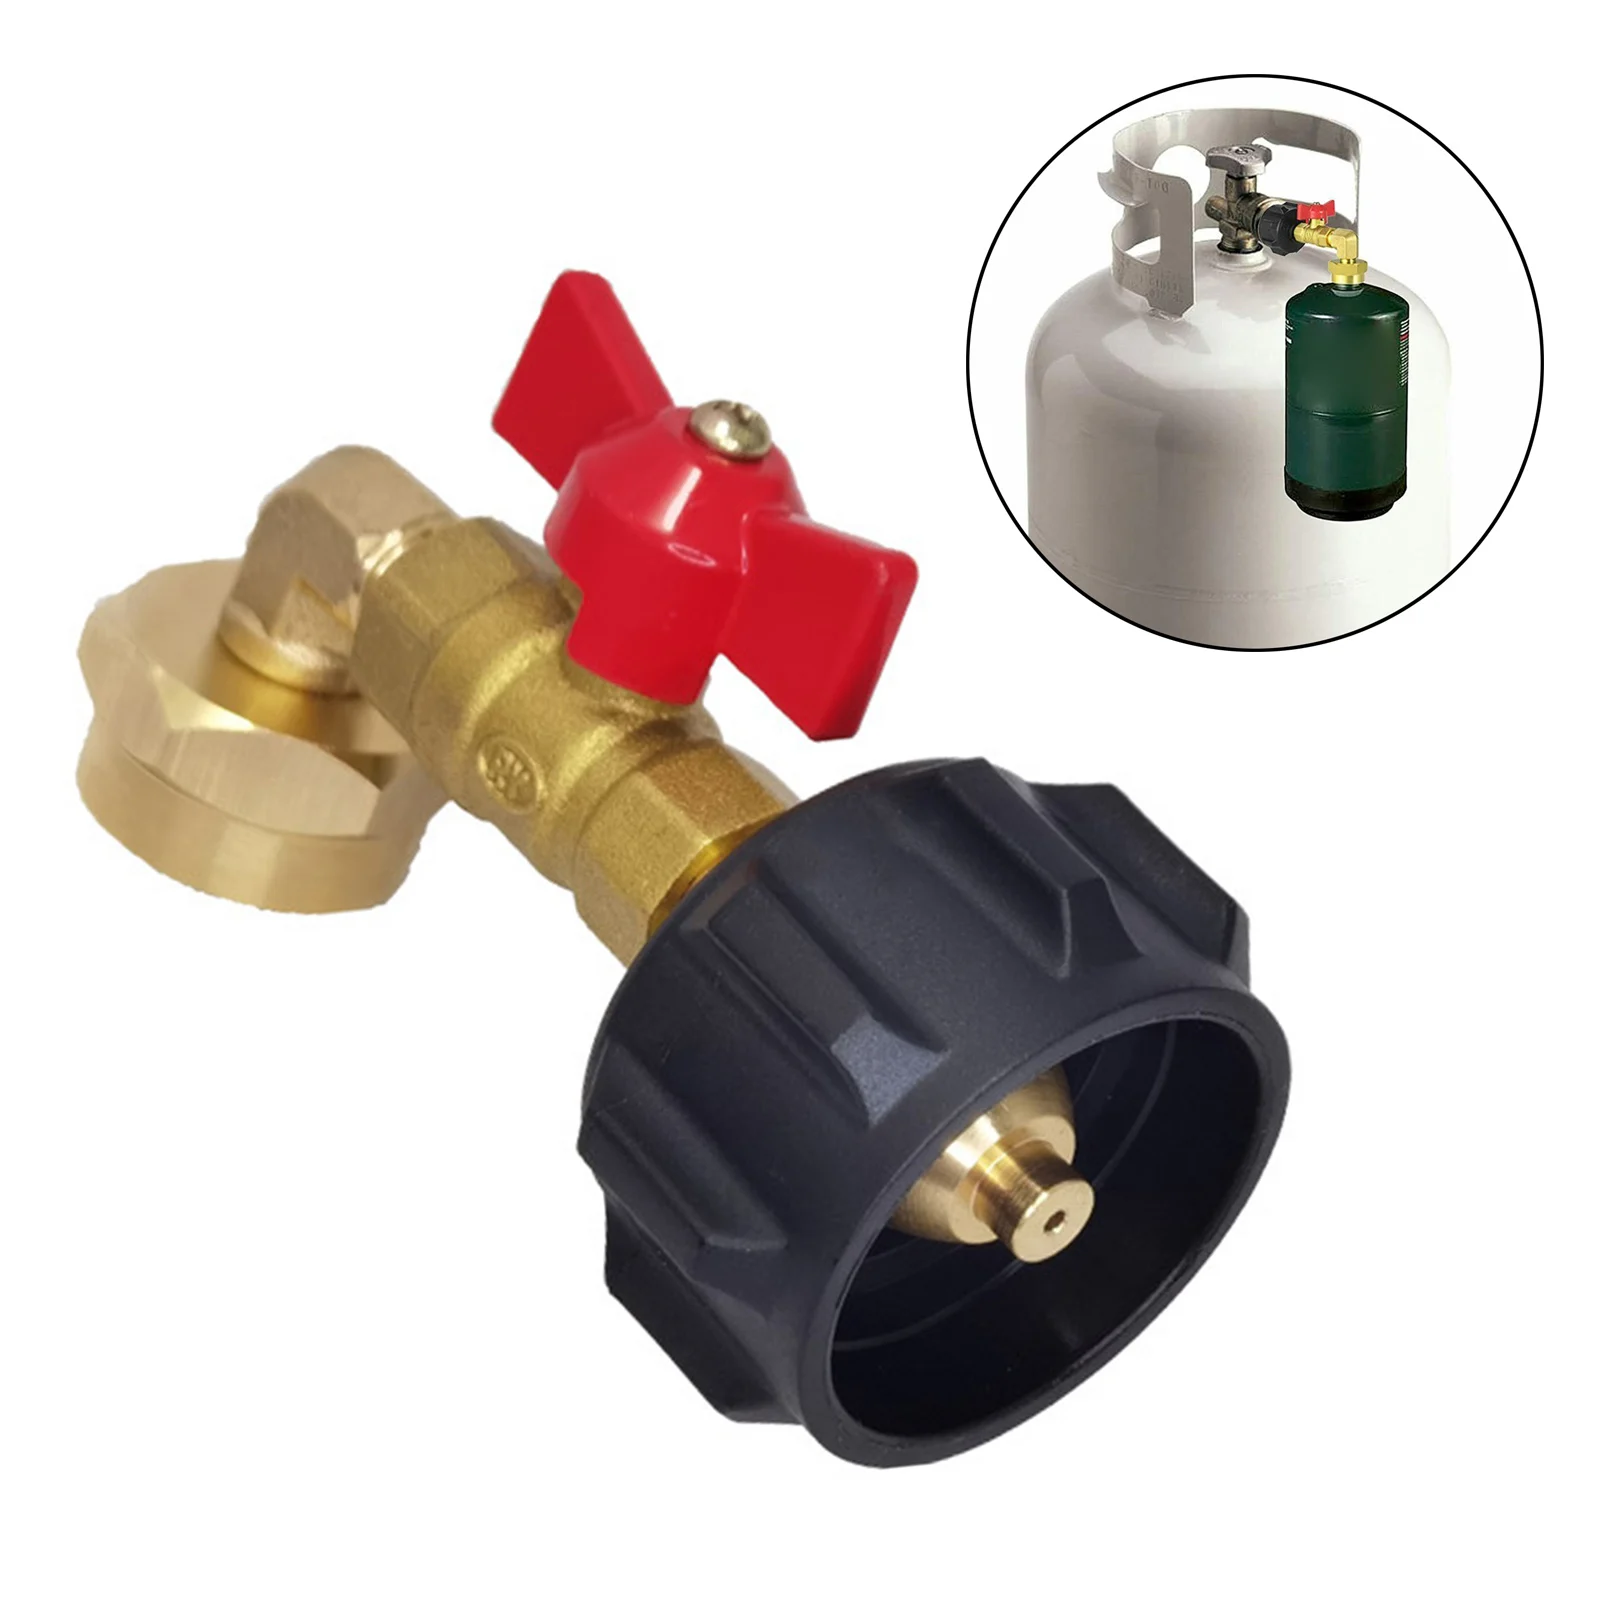 QCC1 Propane Refill Adapter Coupler with Shutoff Valve Fit for Camping Grill